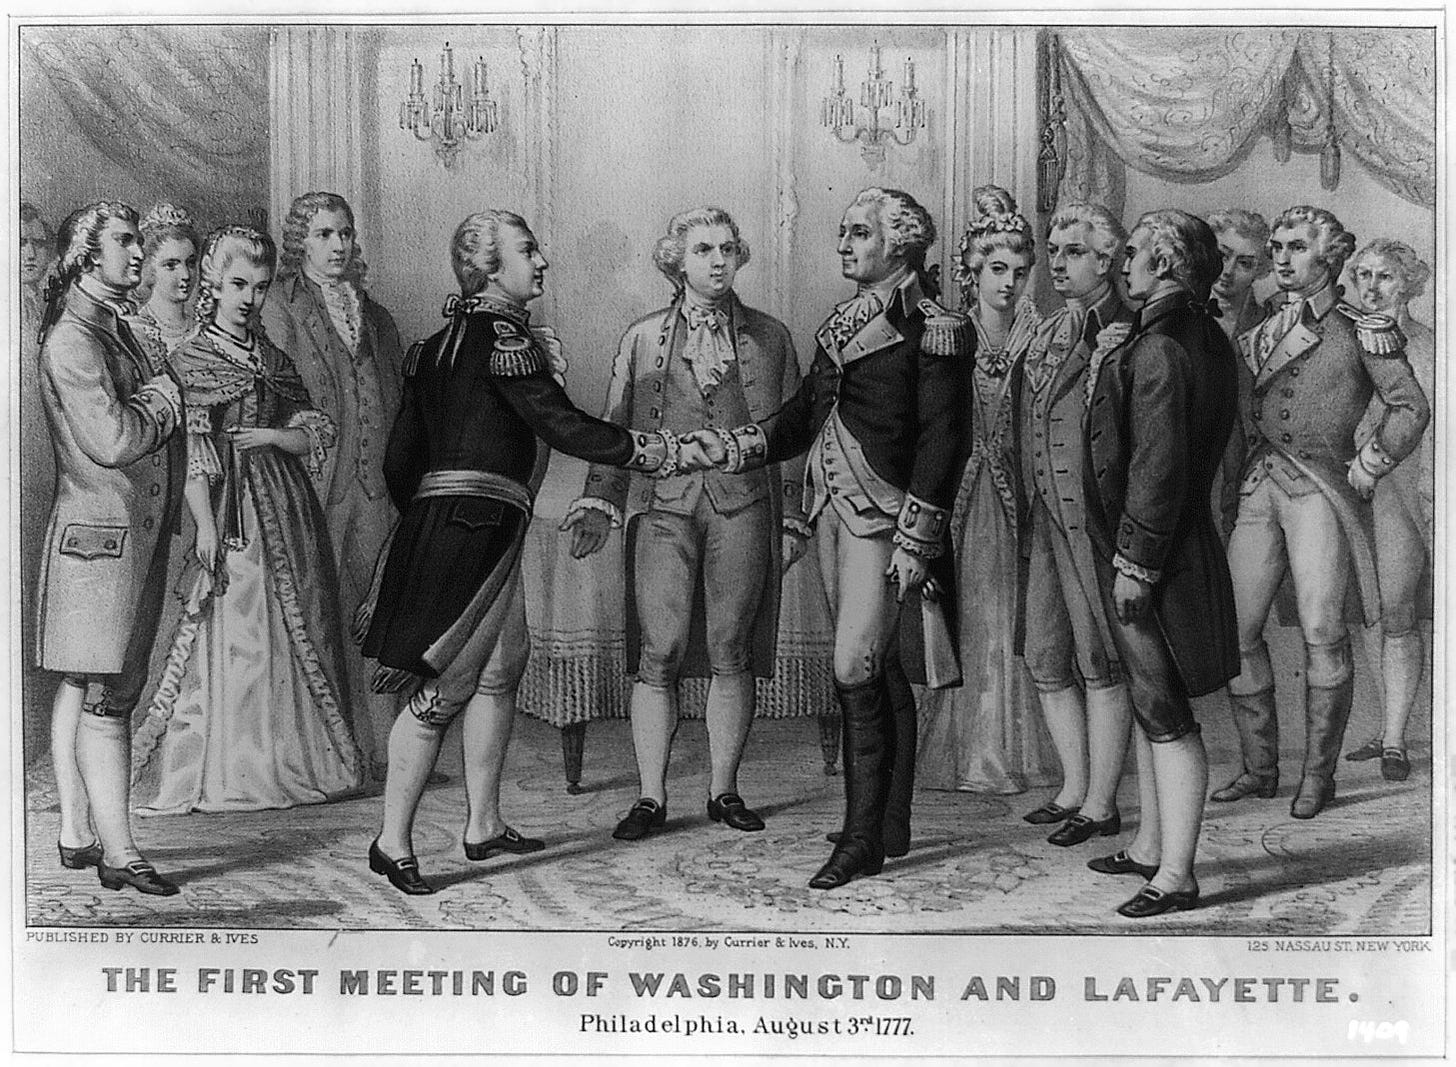 Currier & Ives print: The First Meeting of Washington and Lafayette, Philadelphia, August 3rd, 1777.